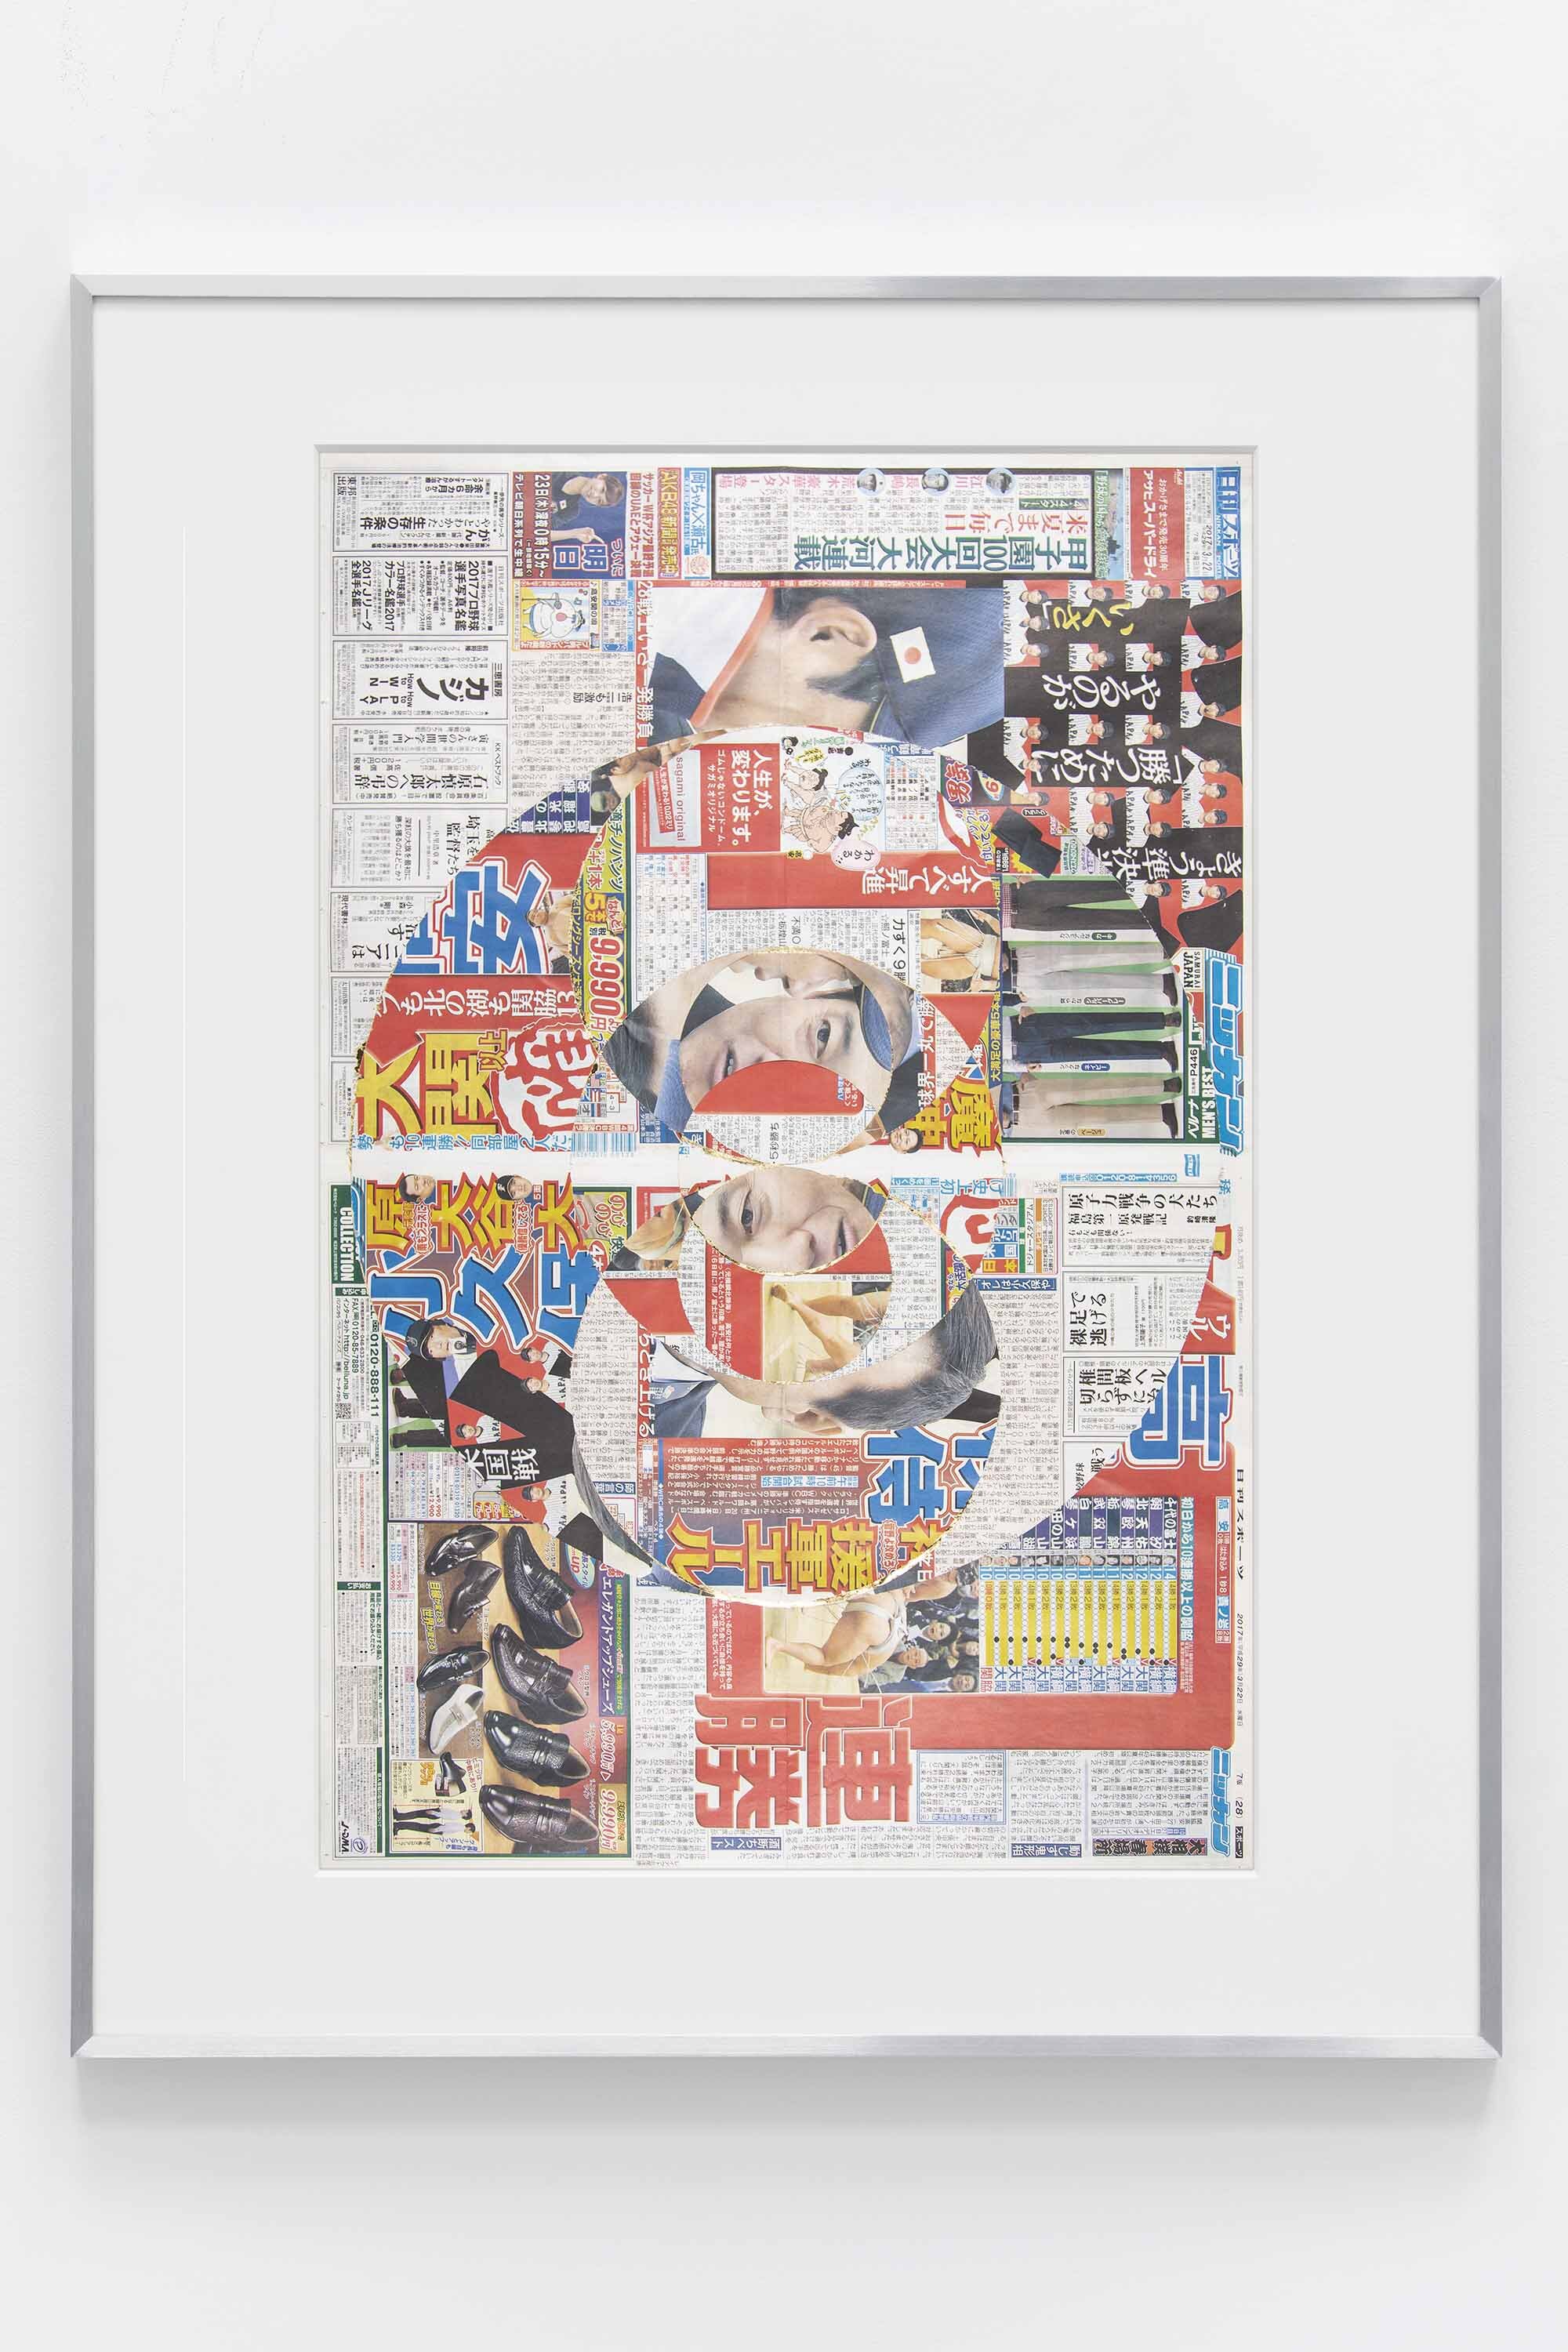   Blind Collage (Seven 180º Rotations, Nikkan Sports: Tokyo, Japan, Wednesday, March 22, 2017)    2021   Newspaper, tape, and 22 karat gold leaf  39 1/8 x 31 1/4 inches  Exhibition:   Foreign Correspondence, 2021  